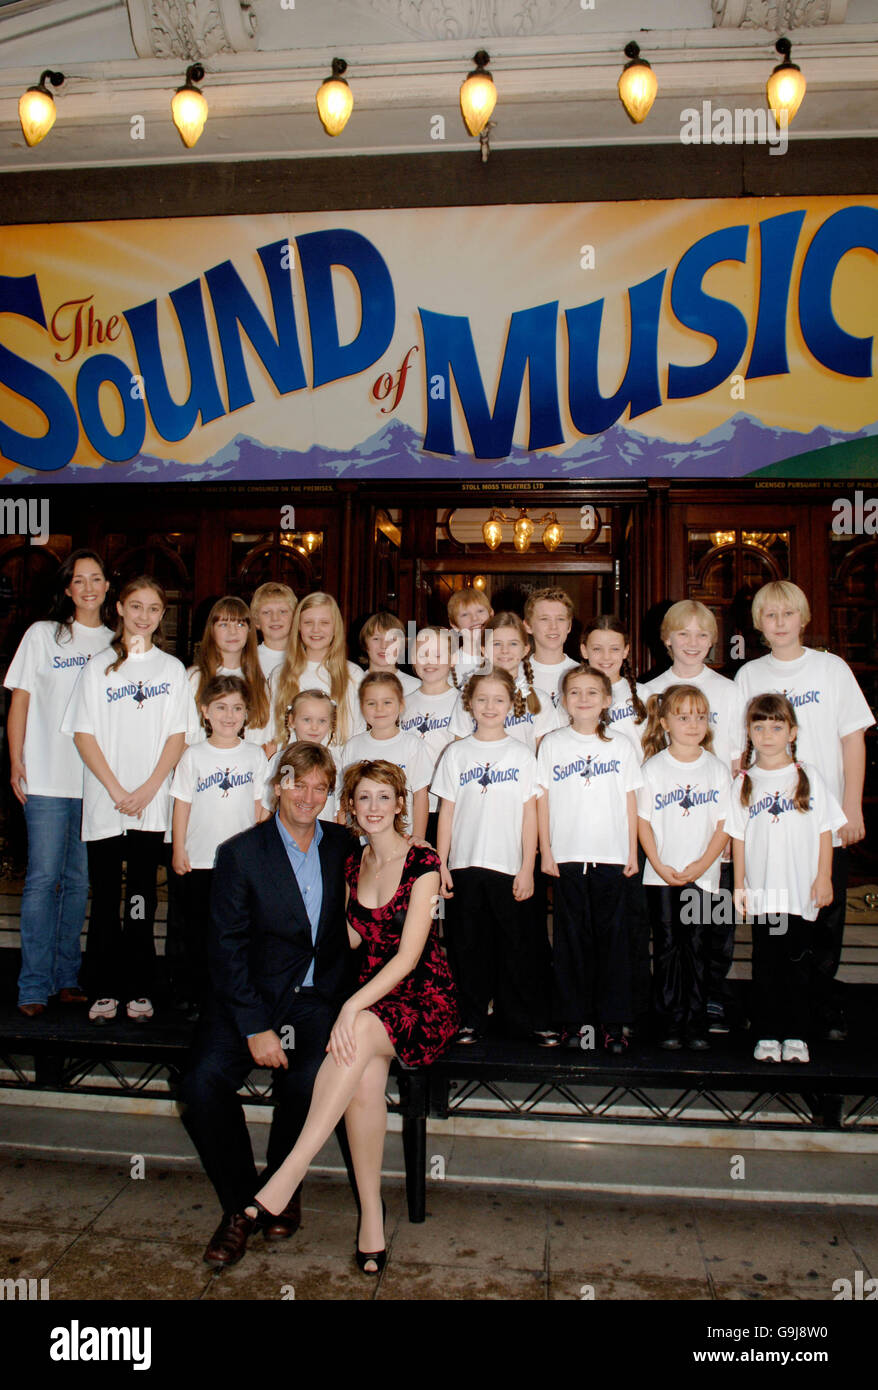 The cast, including lead actors Simon Shepherd and Connie Fisher (front) during a photocall for the stage musical 'The Sound of Music', at The London Palladium in central London. Stock Photo